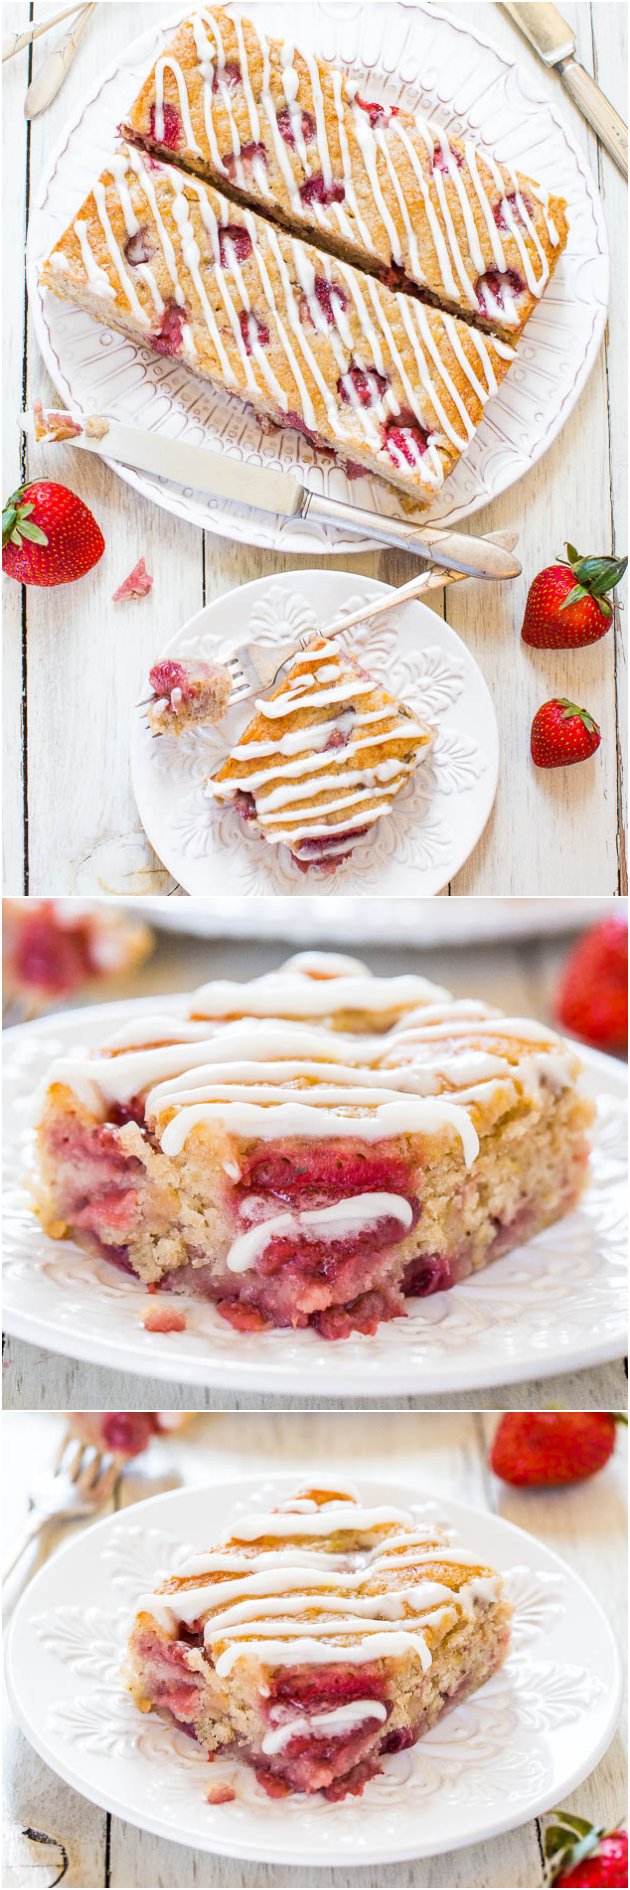 Soft & Fluffy Strawberry Banana Cake — This cake is so soft, moist, fluffy! It's packed with creamy bananas and sweet strawberries. It’s such a rich, flavorful cake! 